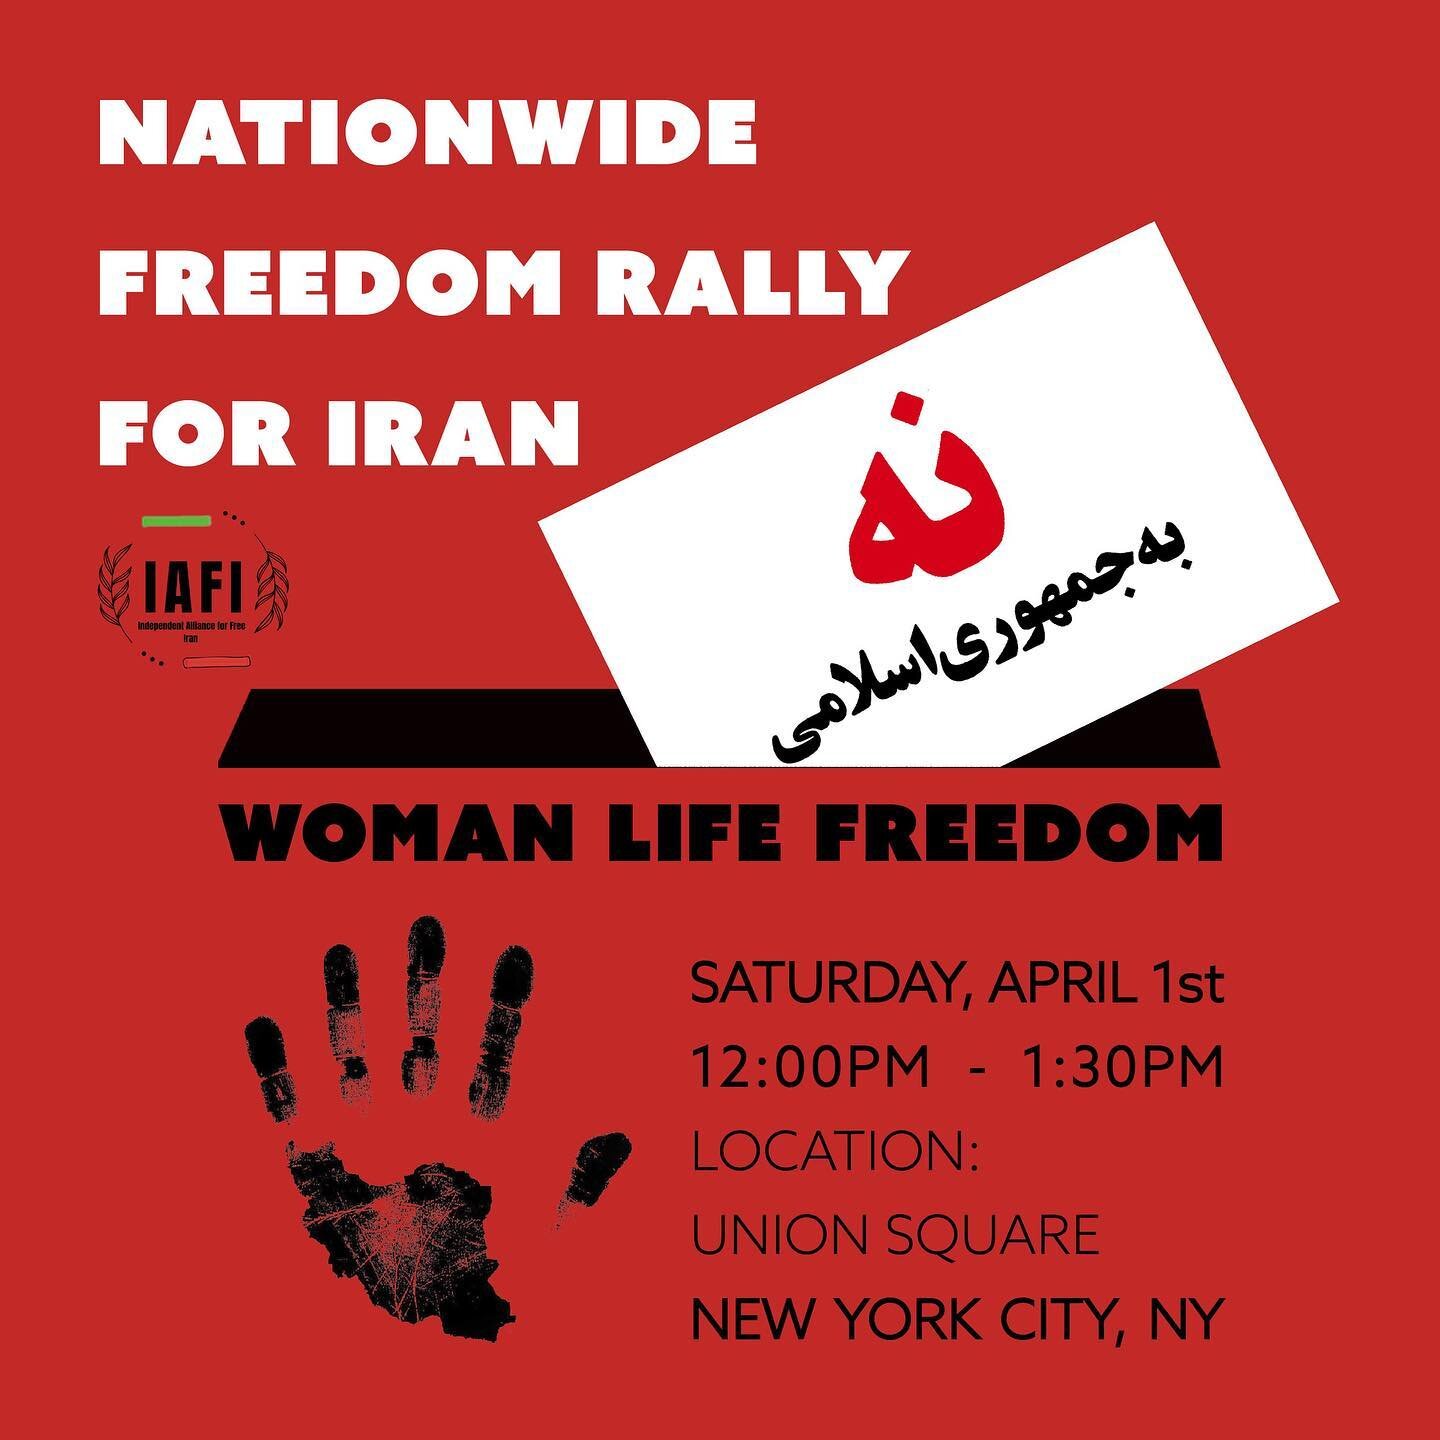 This Saturday in New York City! Join us as we continue our fight for democracy, religious freedom, and basic human rights. Meet us at the steps by the south side of the park - facing Whole Foods. We will shout #NotoIslamicRepublic and demand our repr